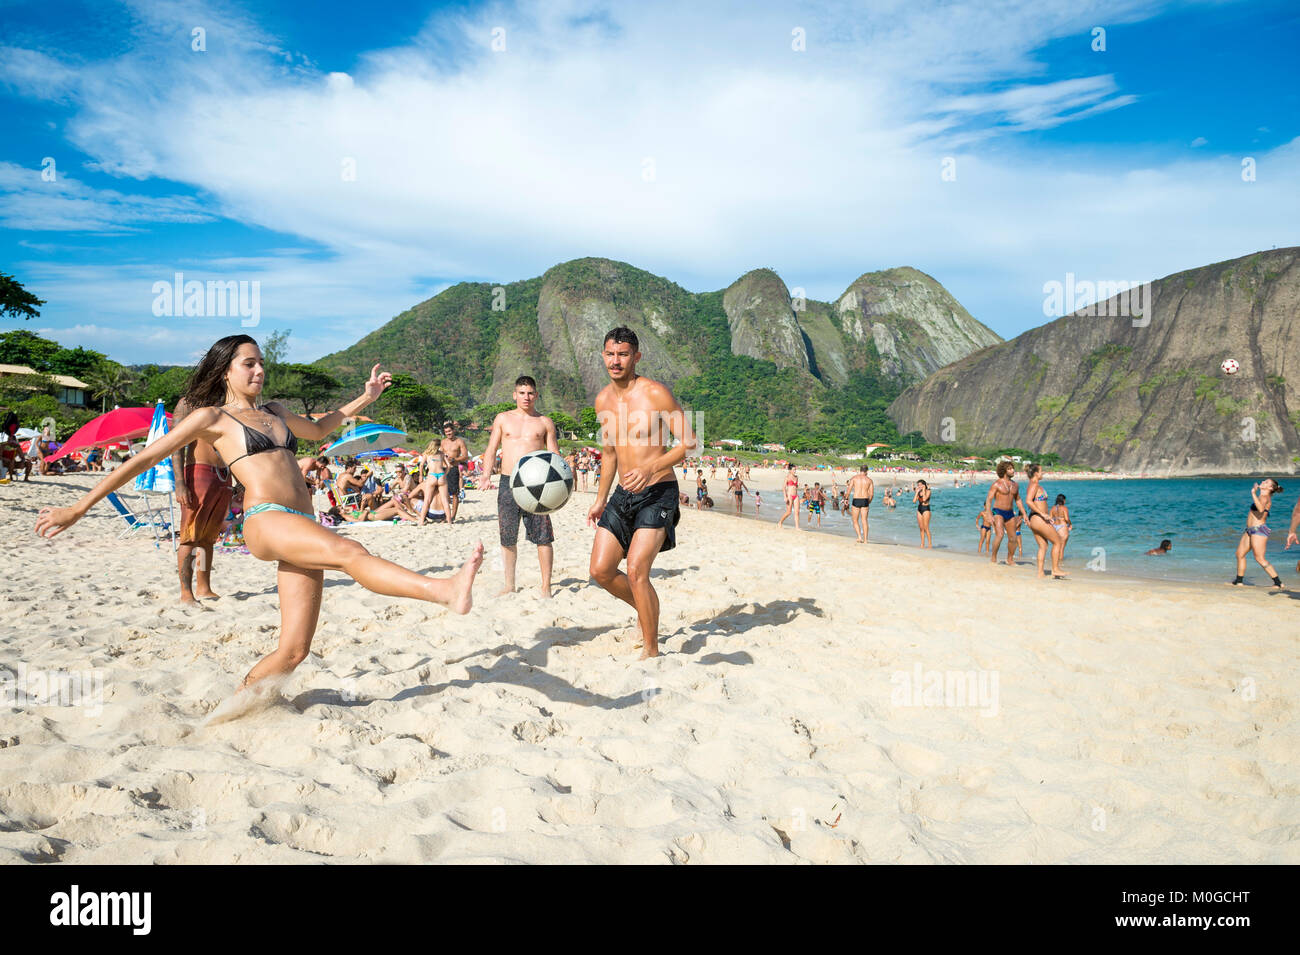 RIO DE JANEIRO - MARCH 20, 2017: Young Brazilians play a game of keepy-uppies (known locally as altinho) on the shore of Itacoatiara Beach. Stock Photo